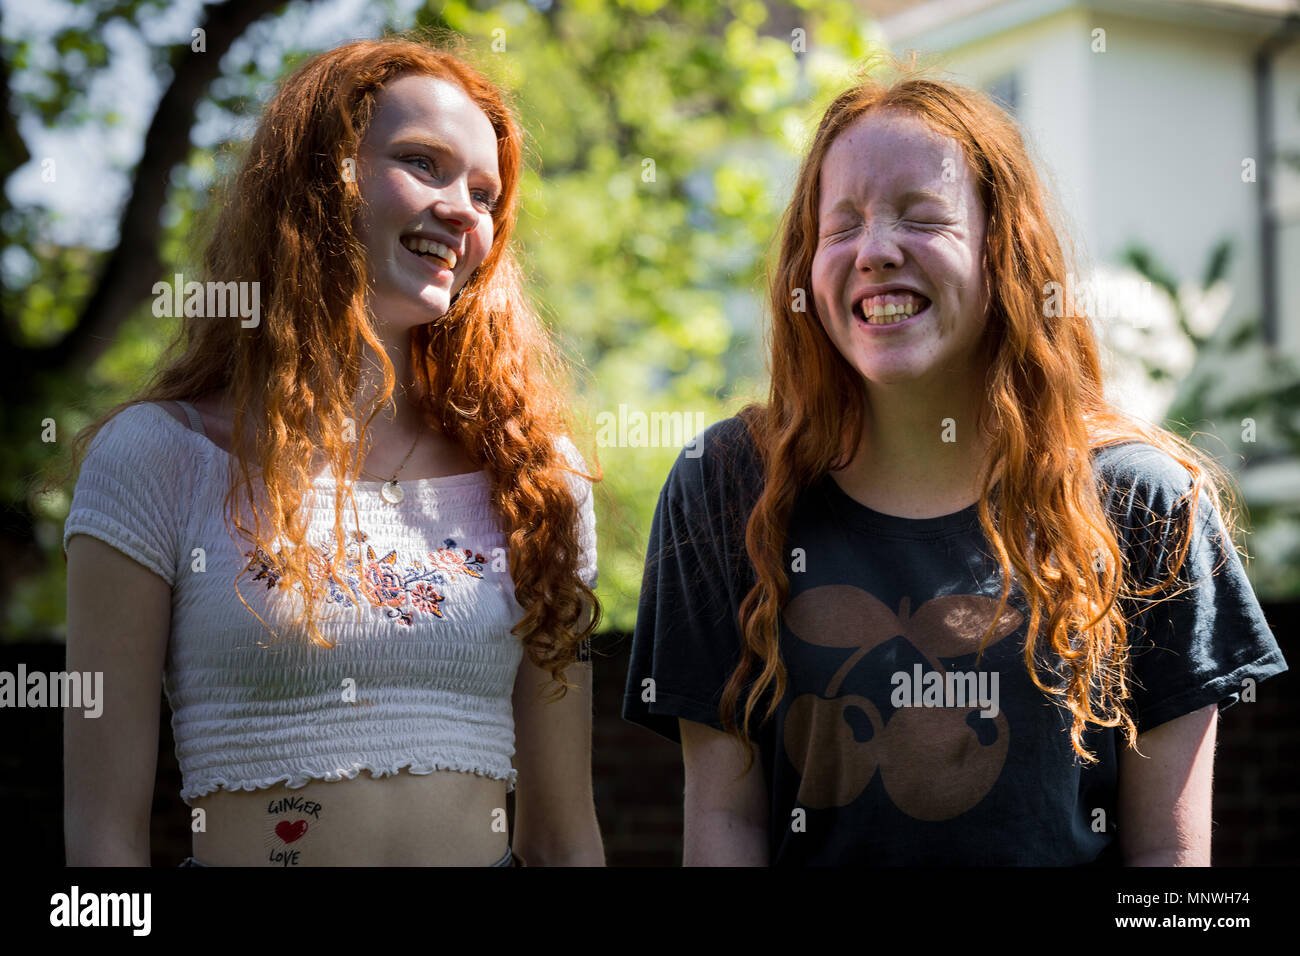 London, UK. 19th May 2018. Redhead Day UK in north London. The annual event sees hundreds of 'gingers' from around the world join in celebration of red hair. Credit: Guy Corbishley/Alamy Live News Stock Photo